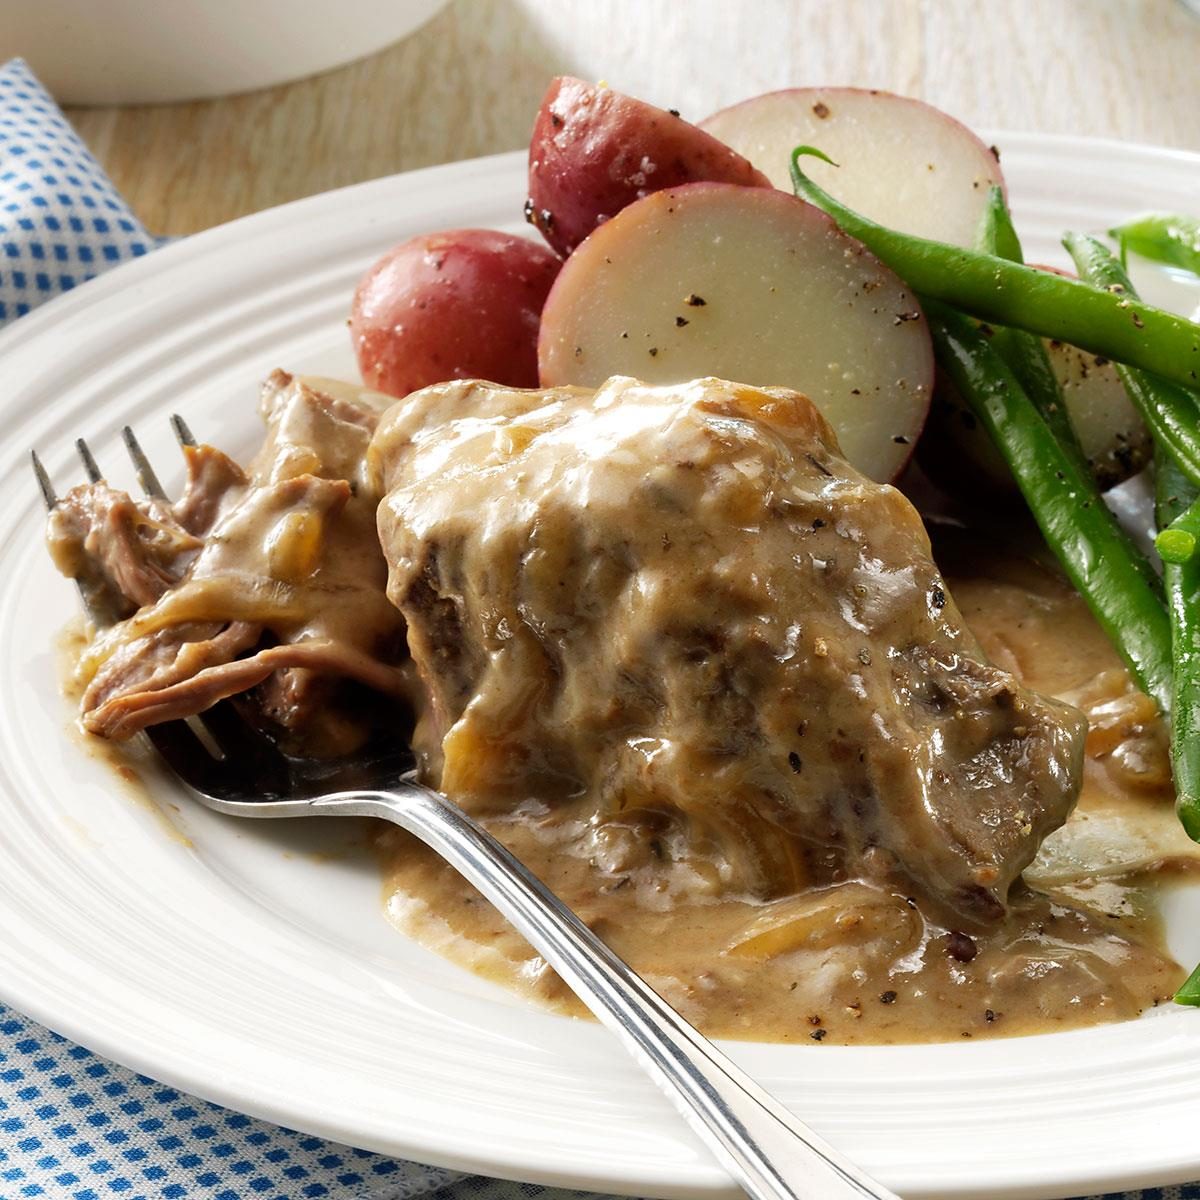 Where can you find the best Swiss steak recipe online?